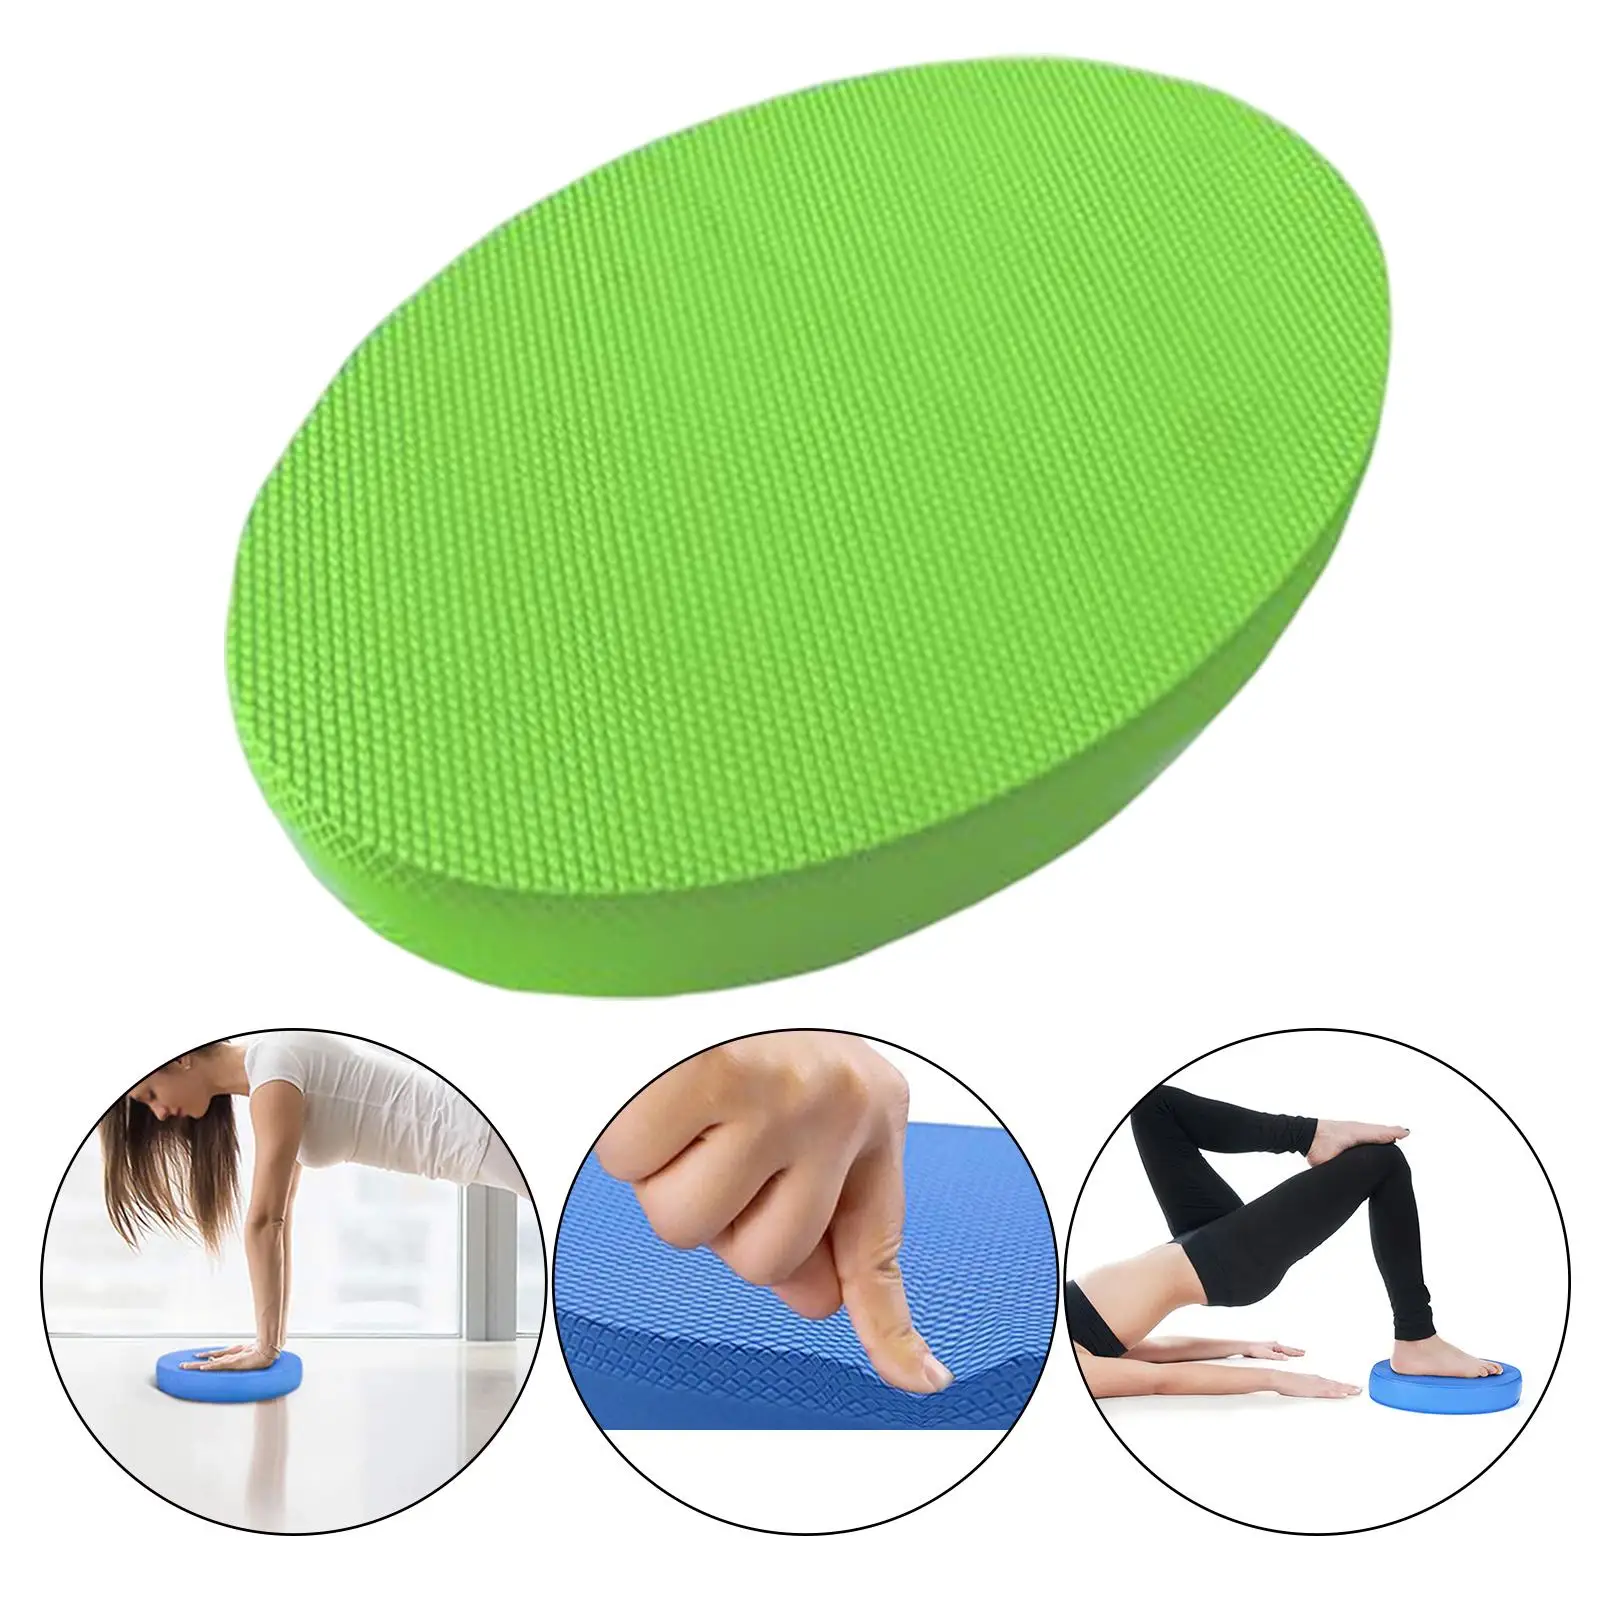 Yoga Waterproof Trainning Equipment Balance Pad for Fitness Workouts Gym Physical